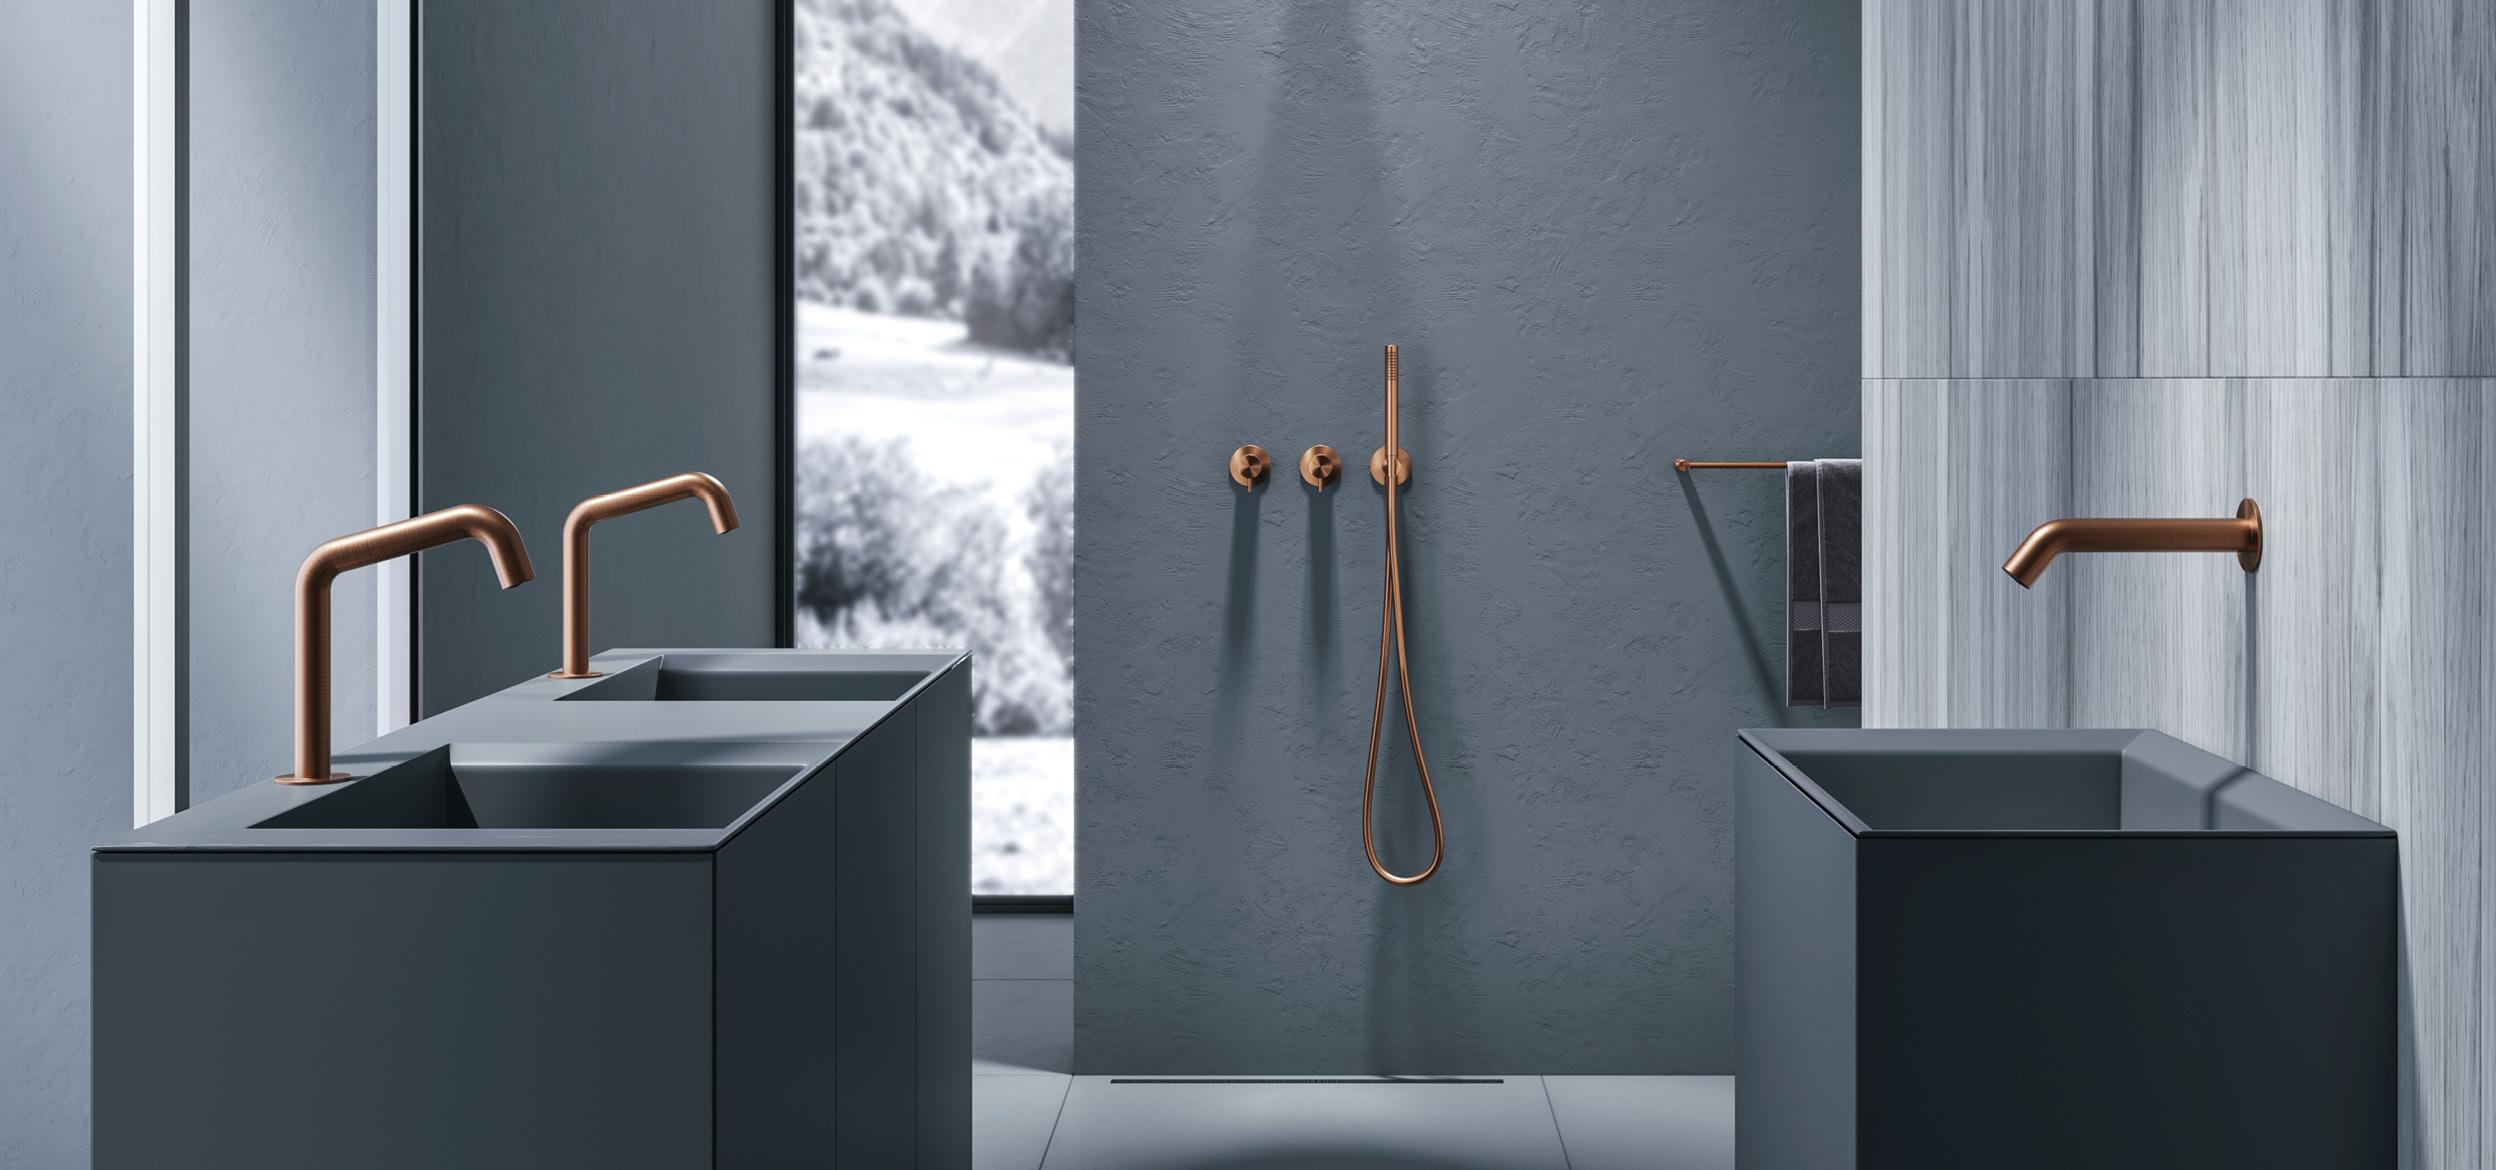 Touchless, the faucet with sensor from Radomonte Project